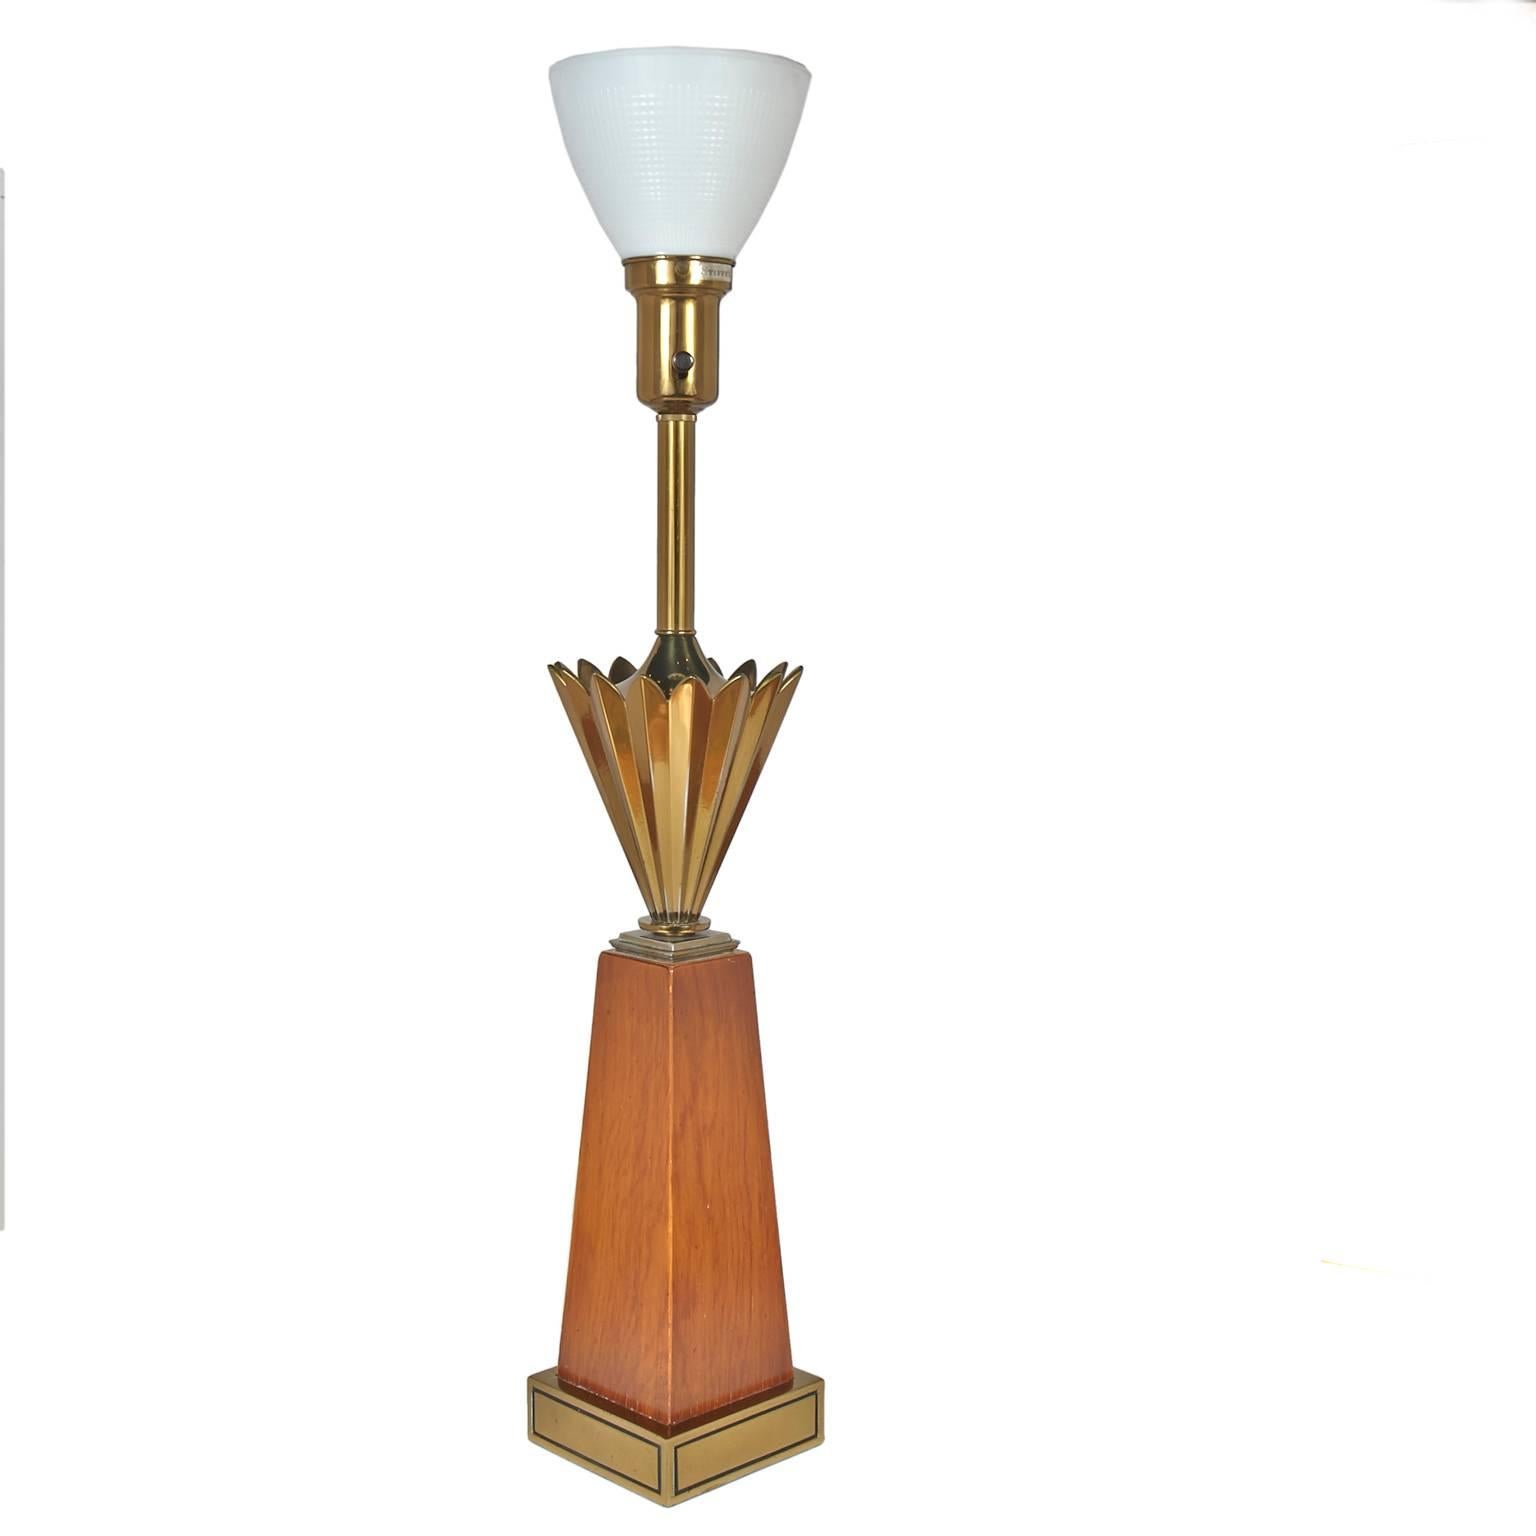 Mid-Century Modern Stiffel table lamp with brass crown and walnut base with brass base.
Original shade, glass diffuser.